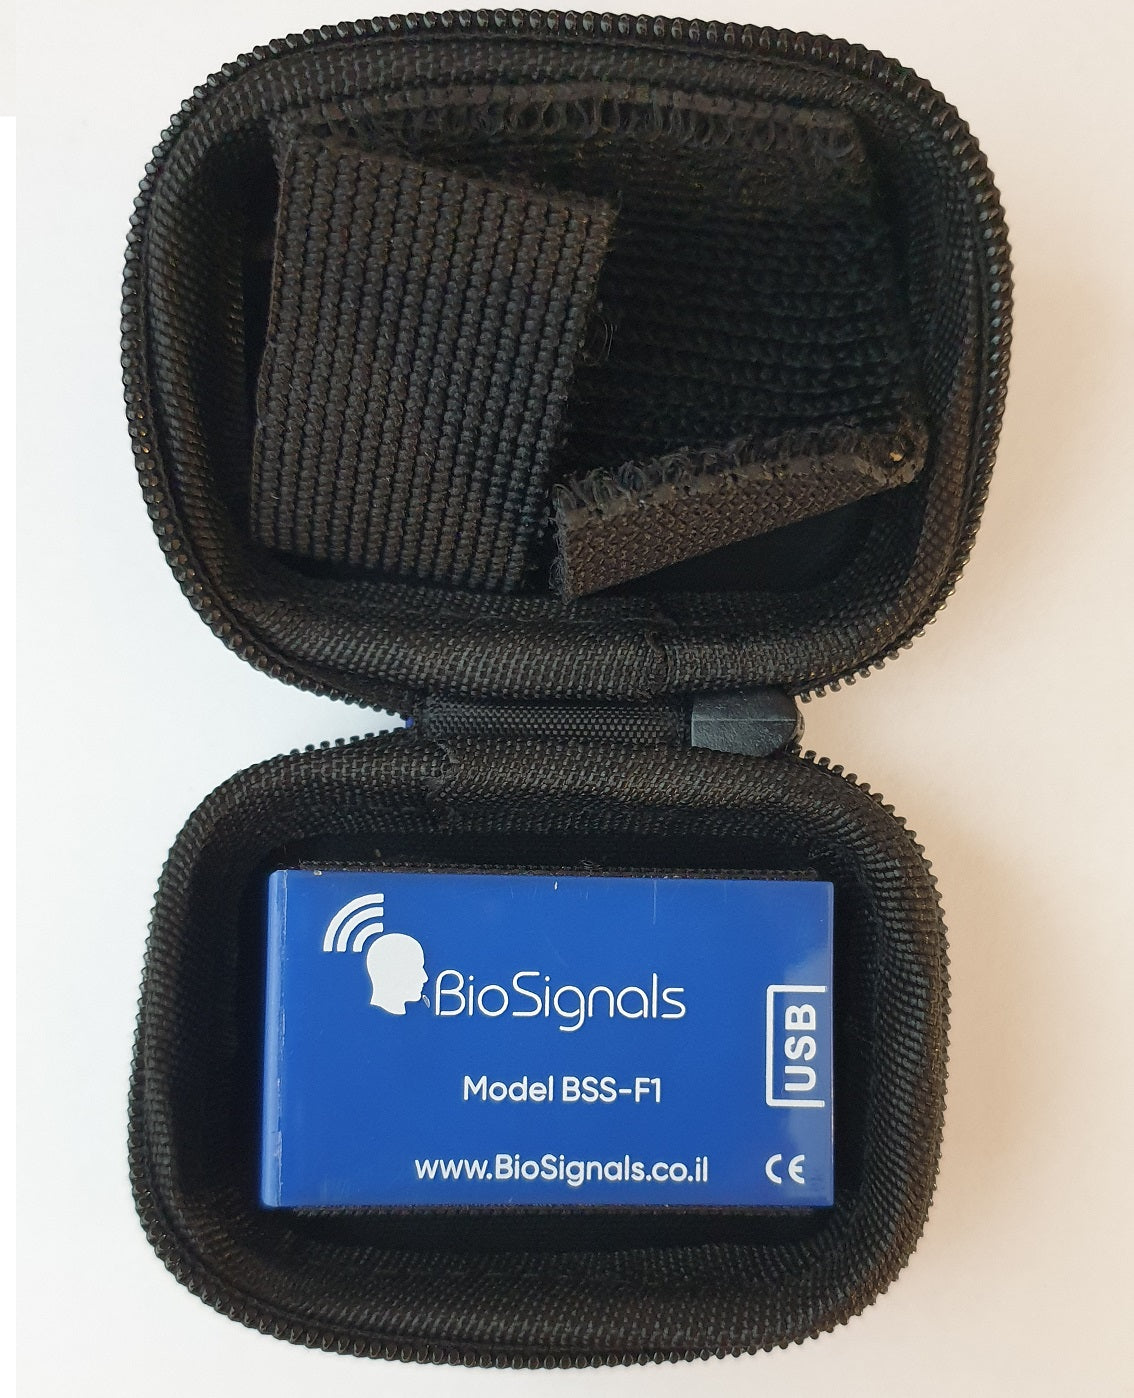 Biofeedback wireless BLE Finger device with 3 sensors. Professional product for clinical or home use.